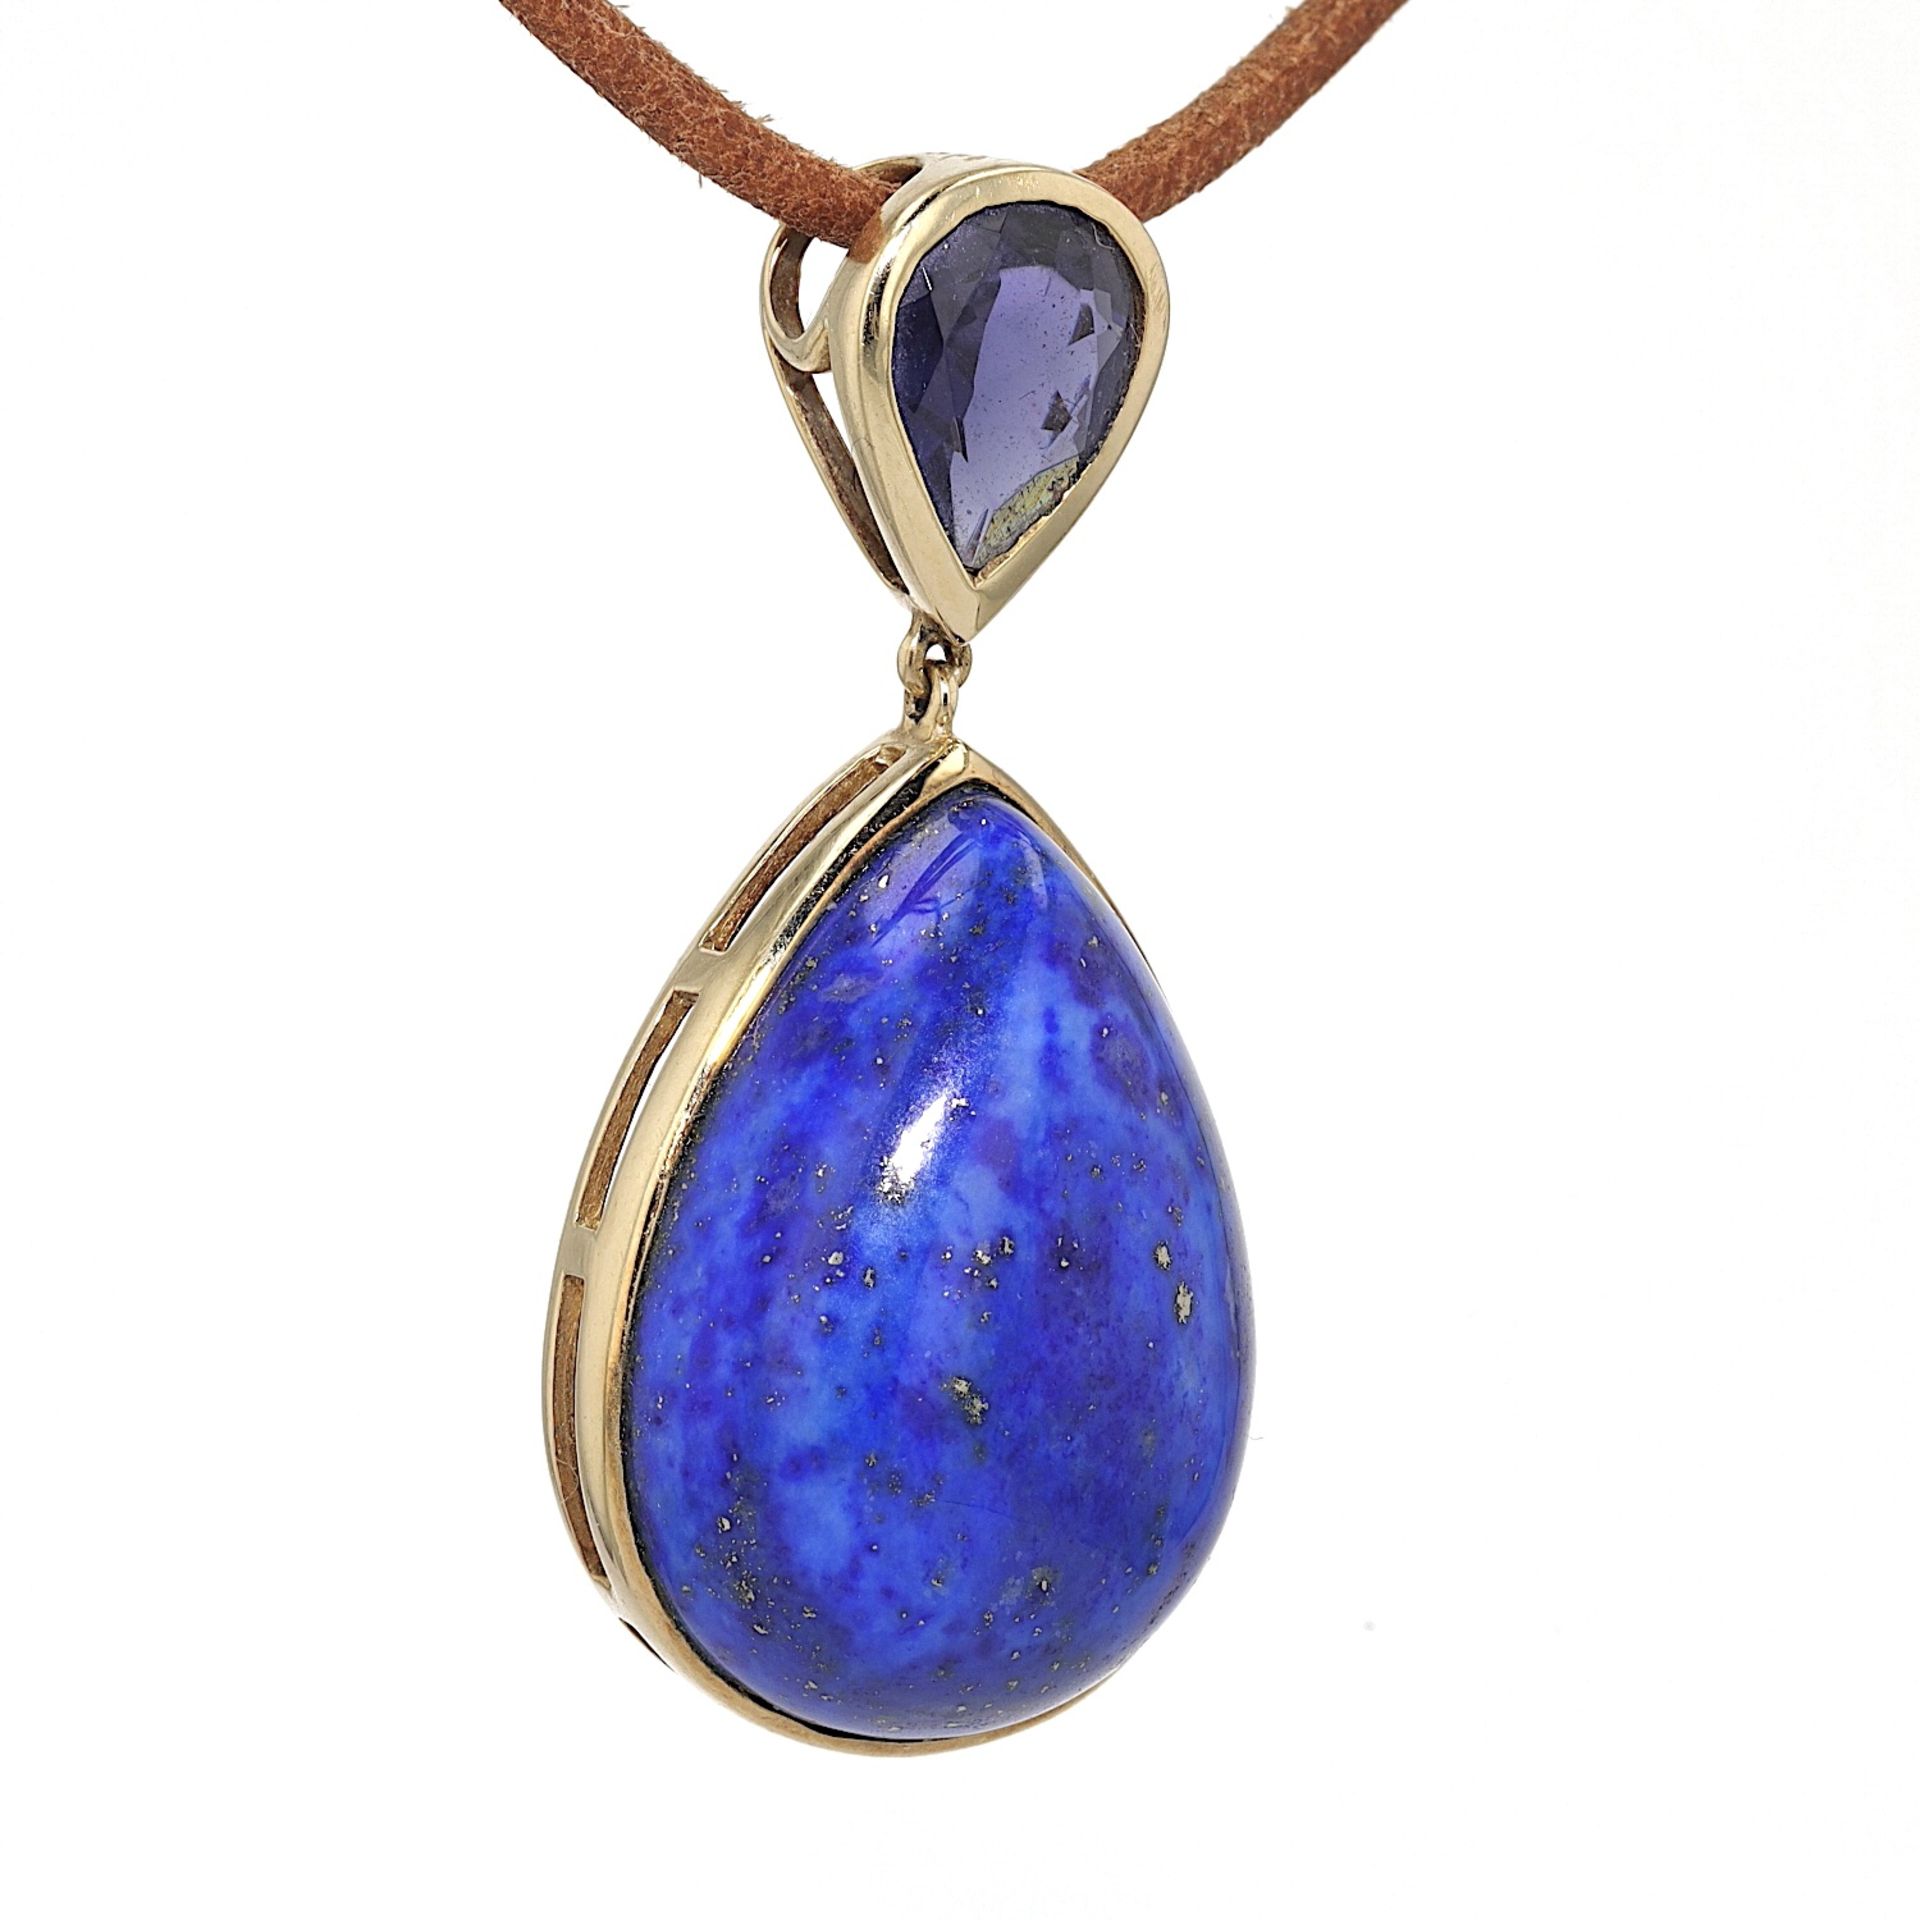 Pendant with a lapis lazuli - Image 3 of 4